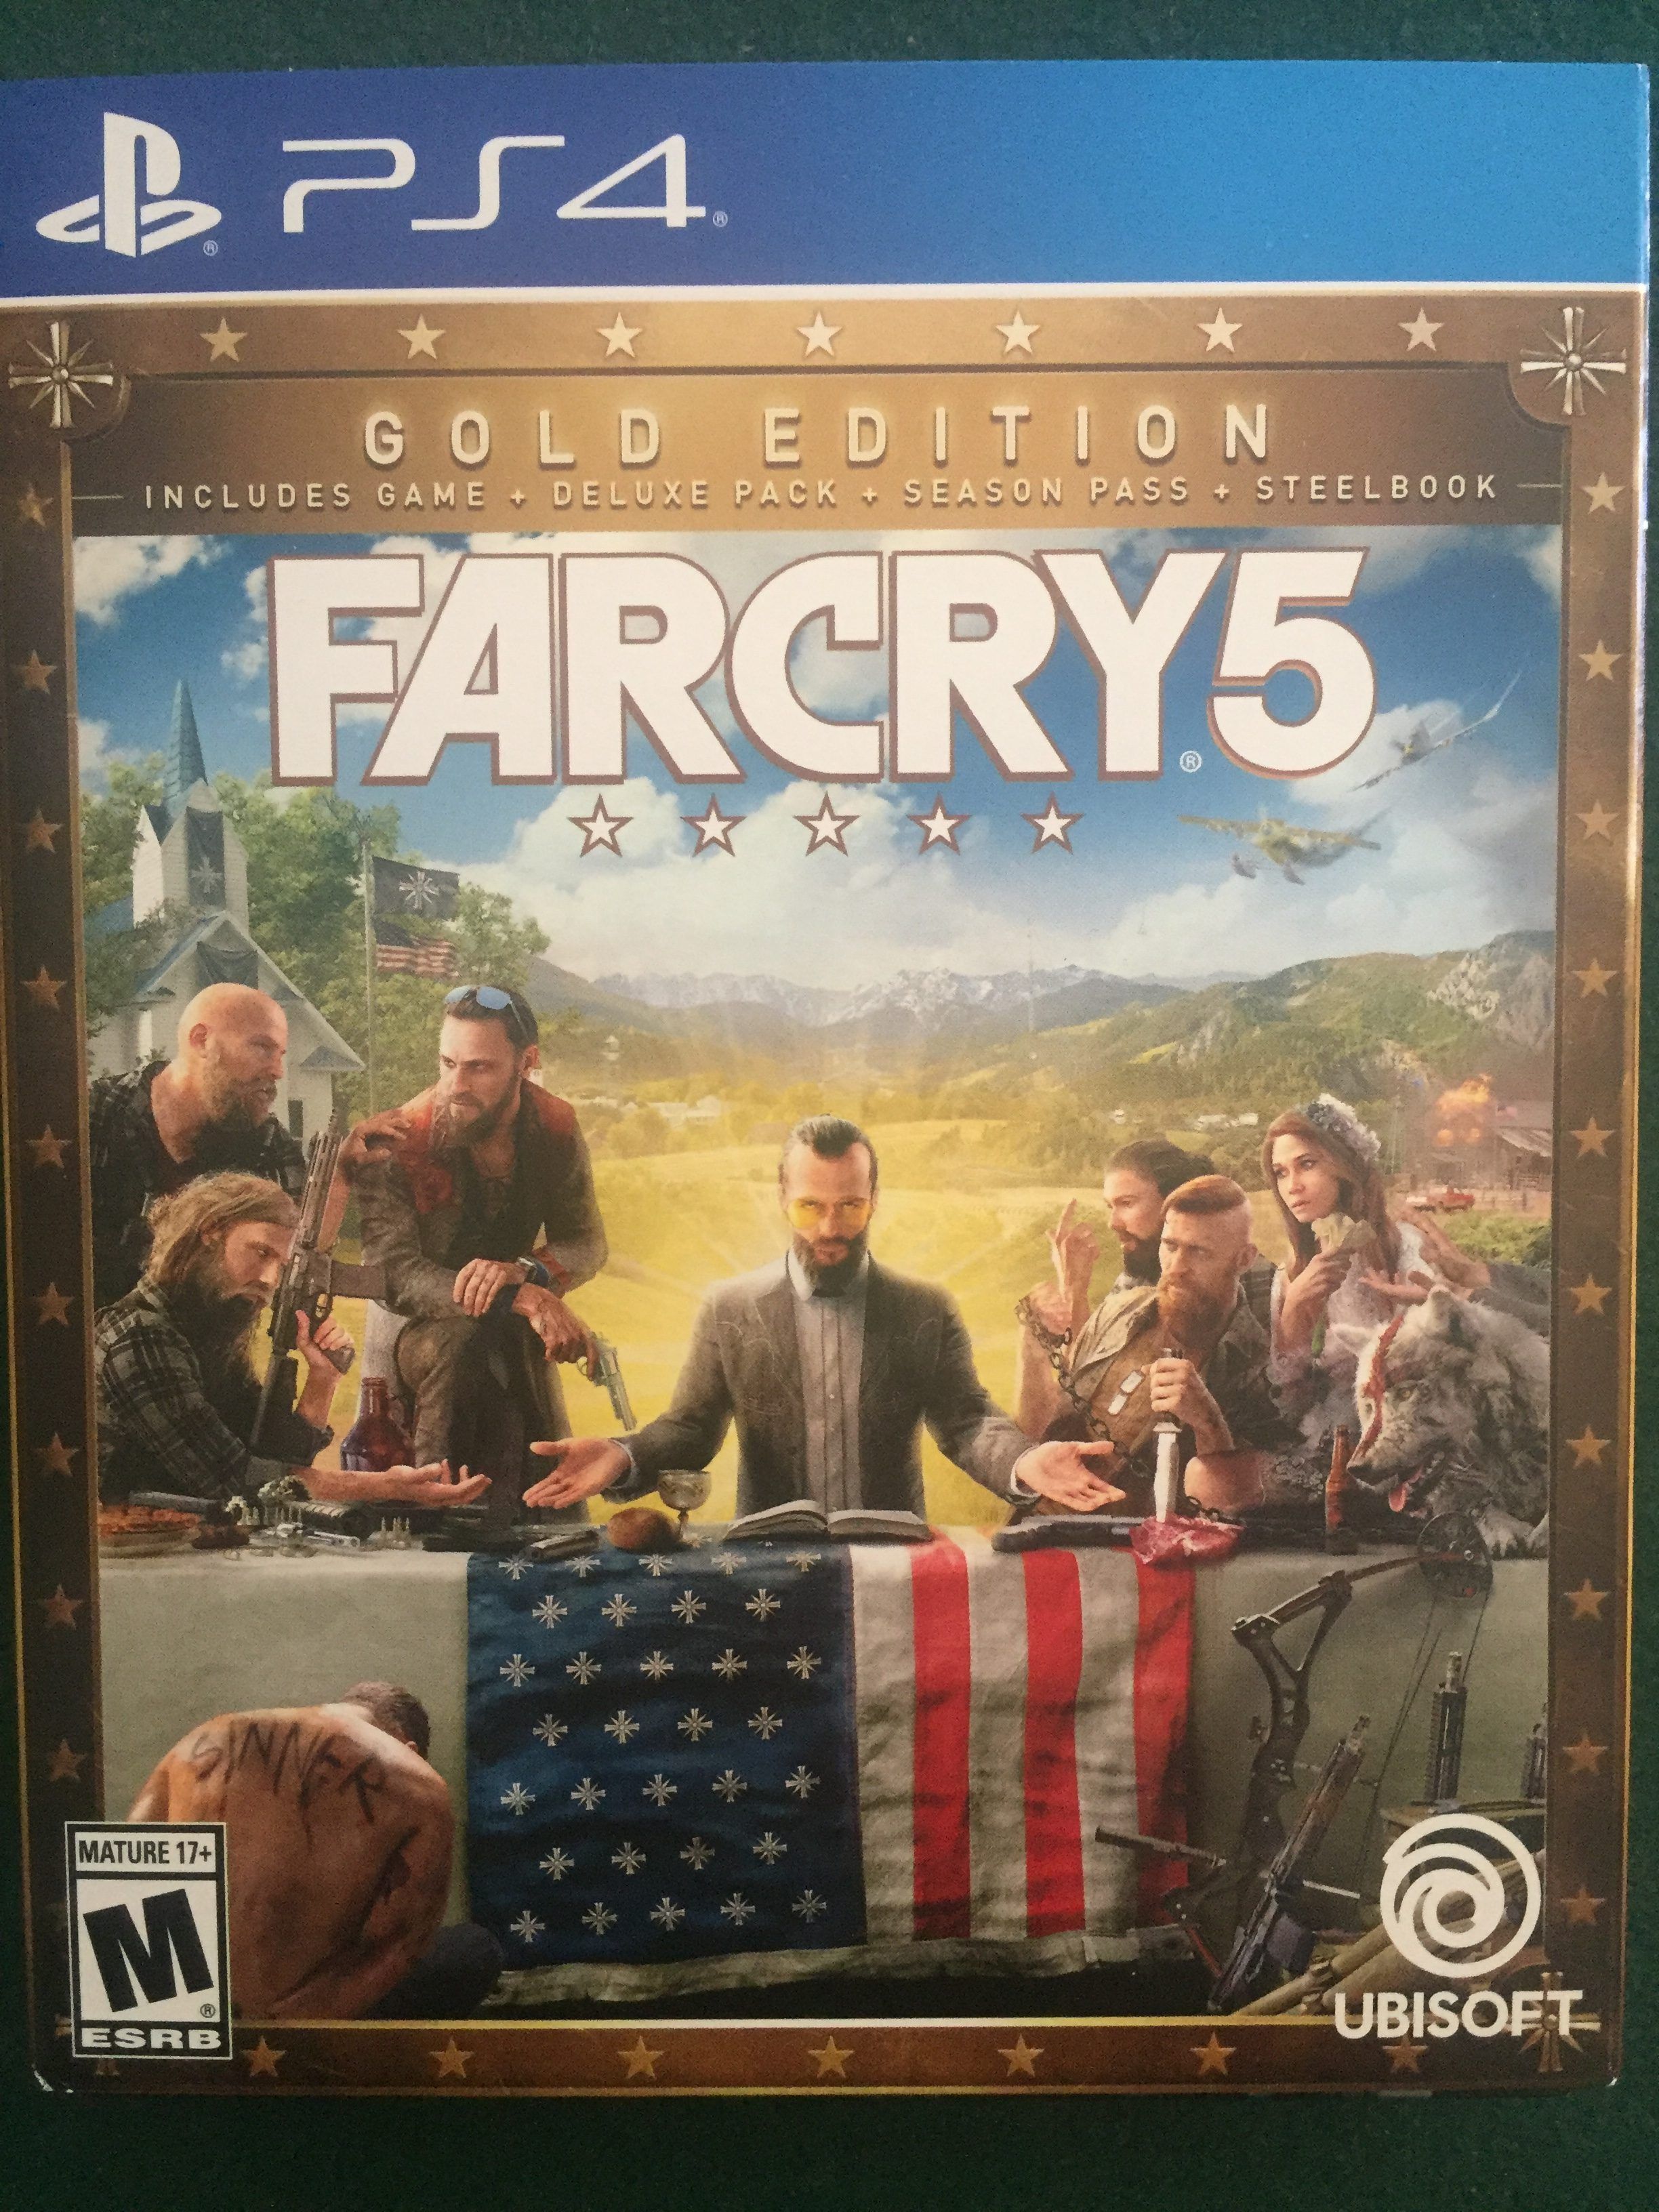 "Far Cry 5" has sold copies quickly and has been regarded as one of the best in the series. Photo by Justin Barnes